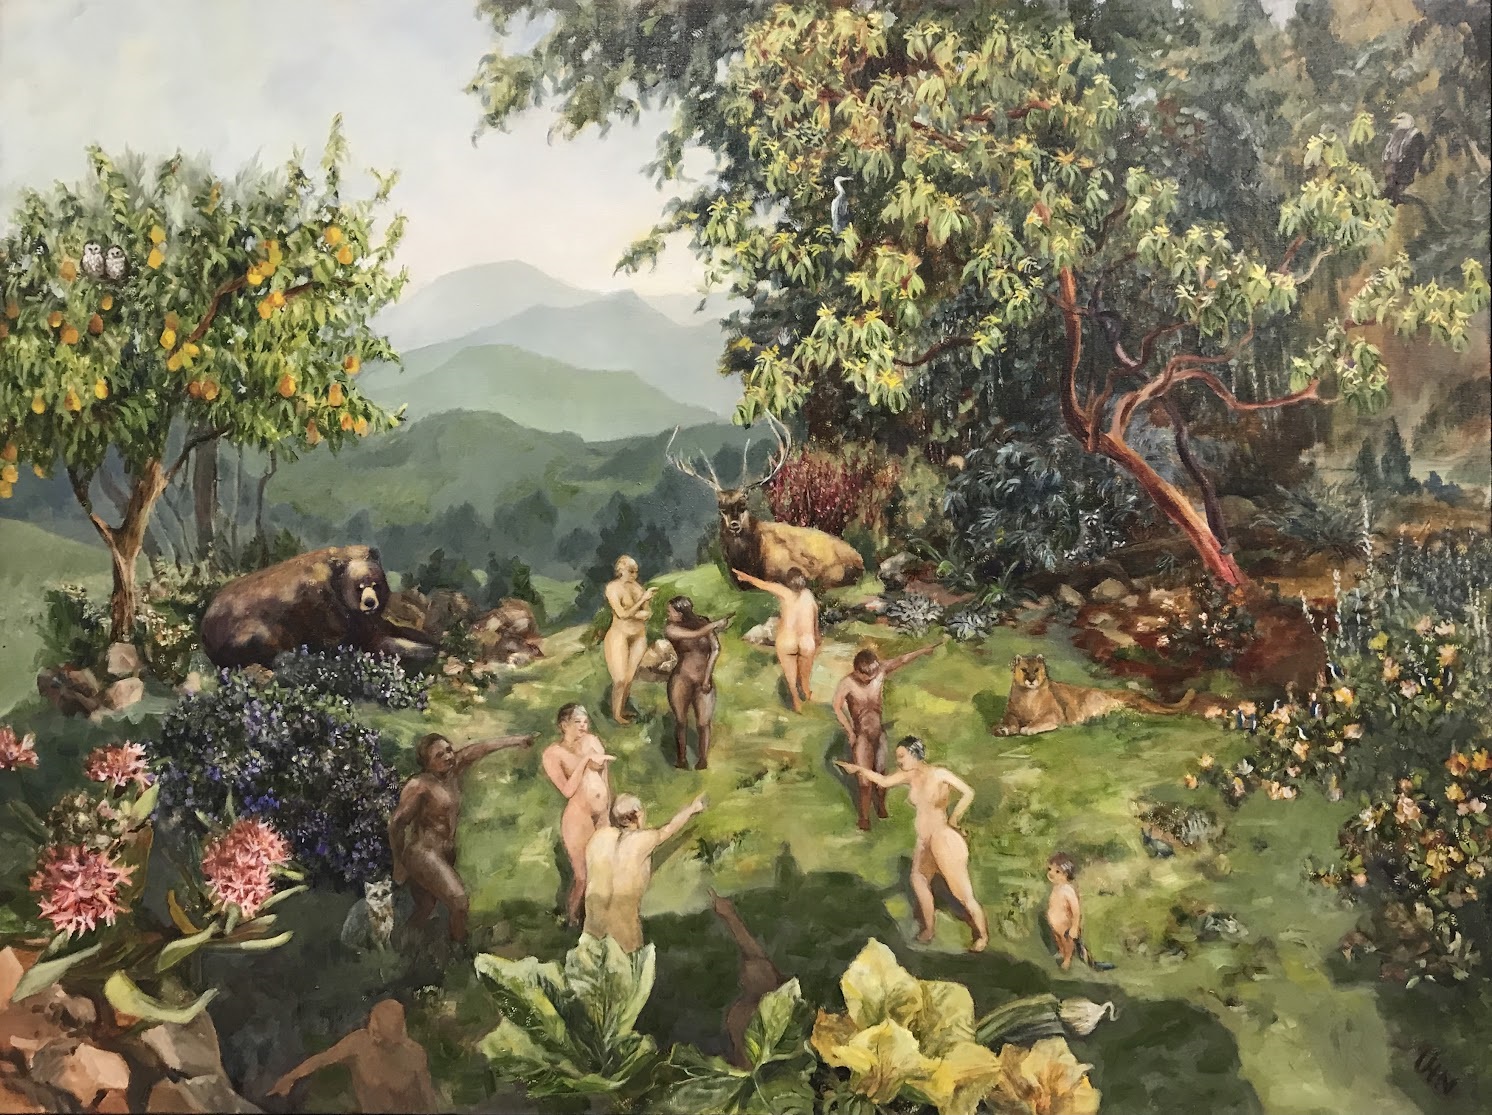 Garden of Eden - Painting by UTN, Figures in the natural world communicating or accusing each other.